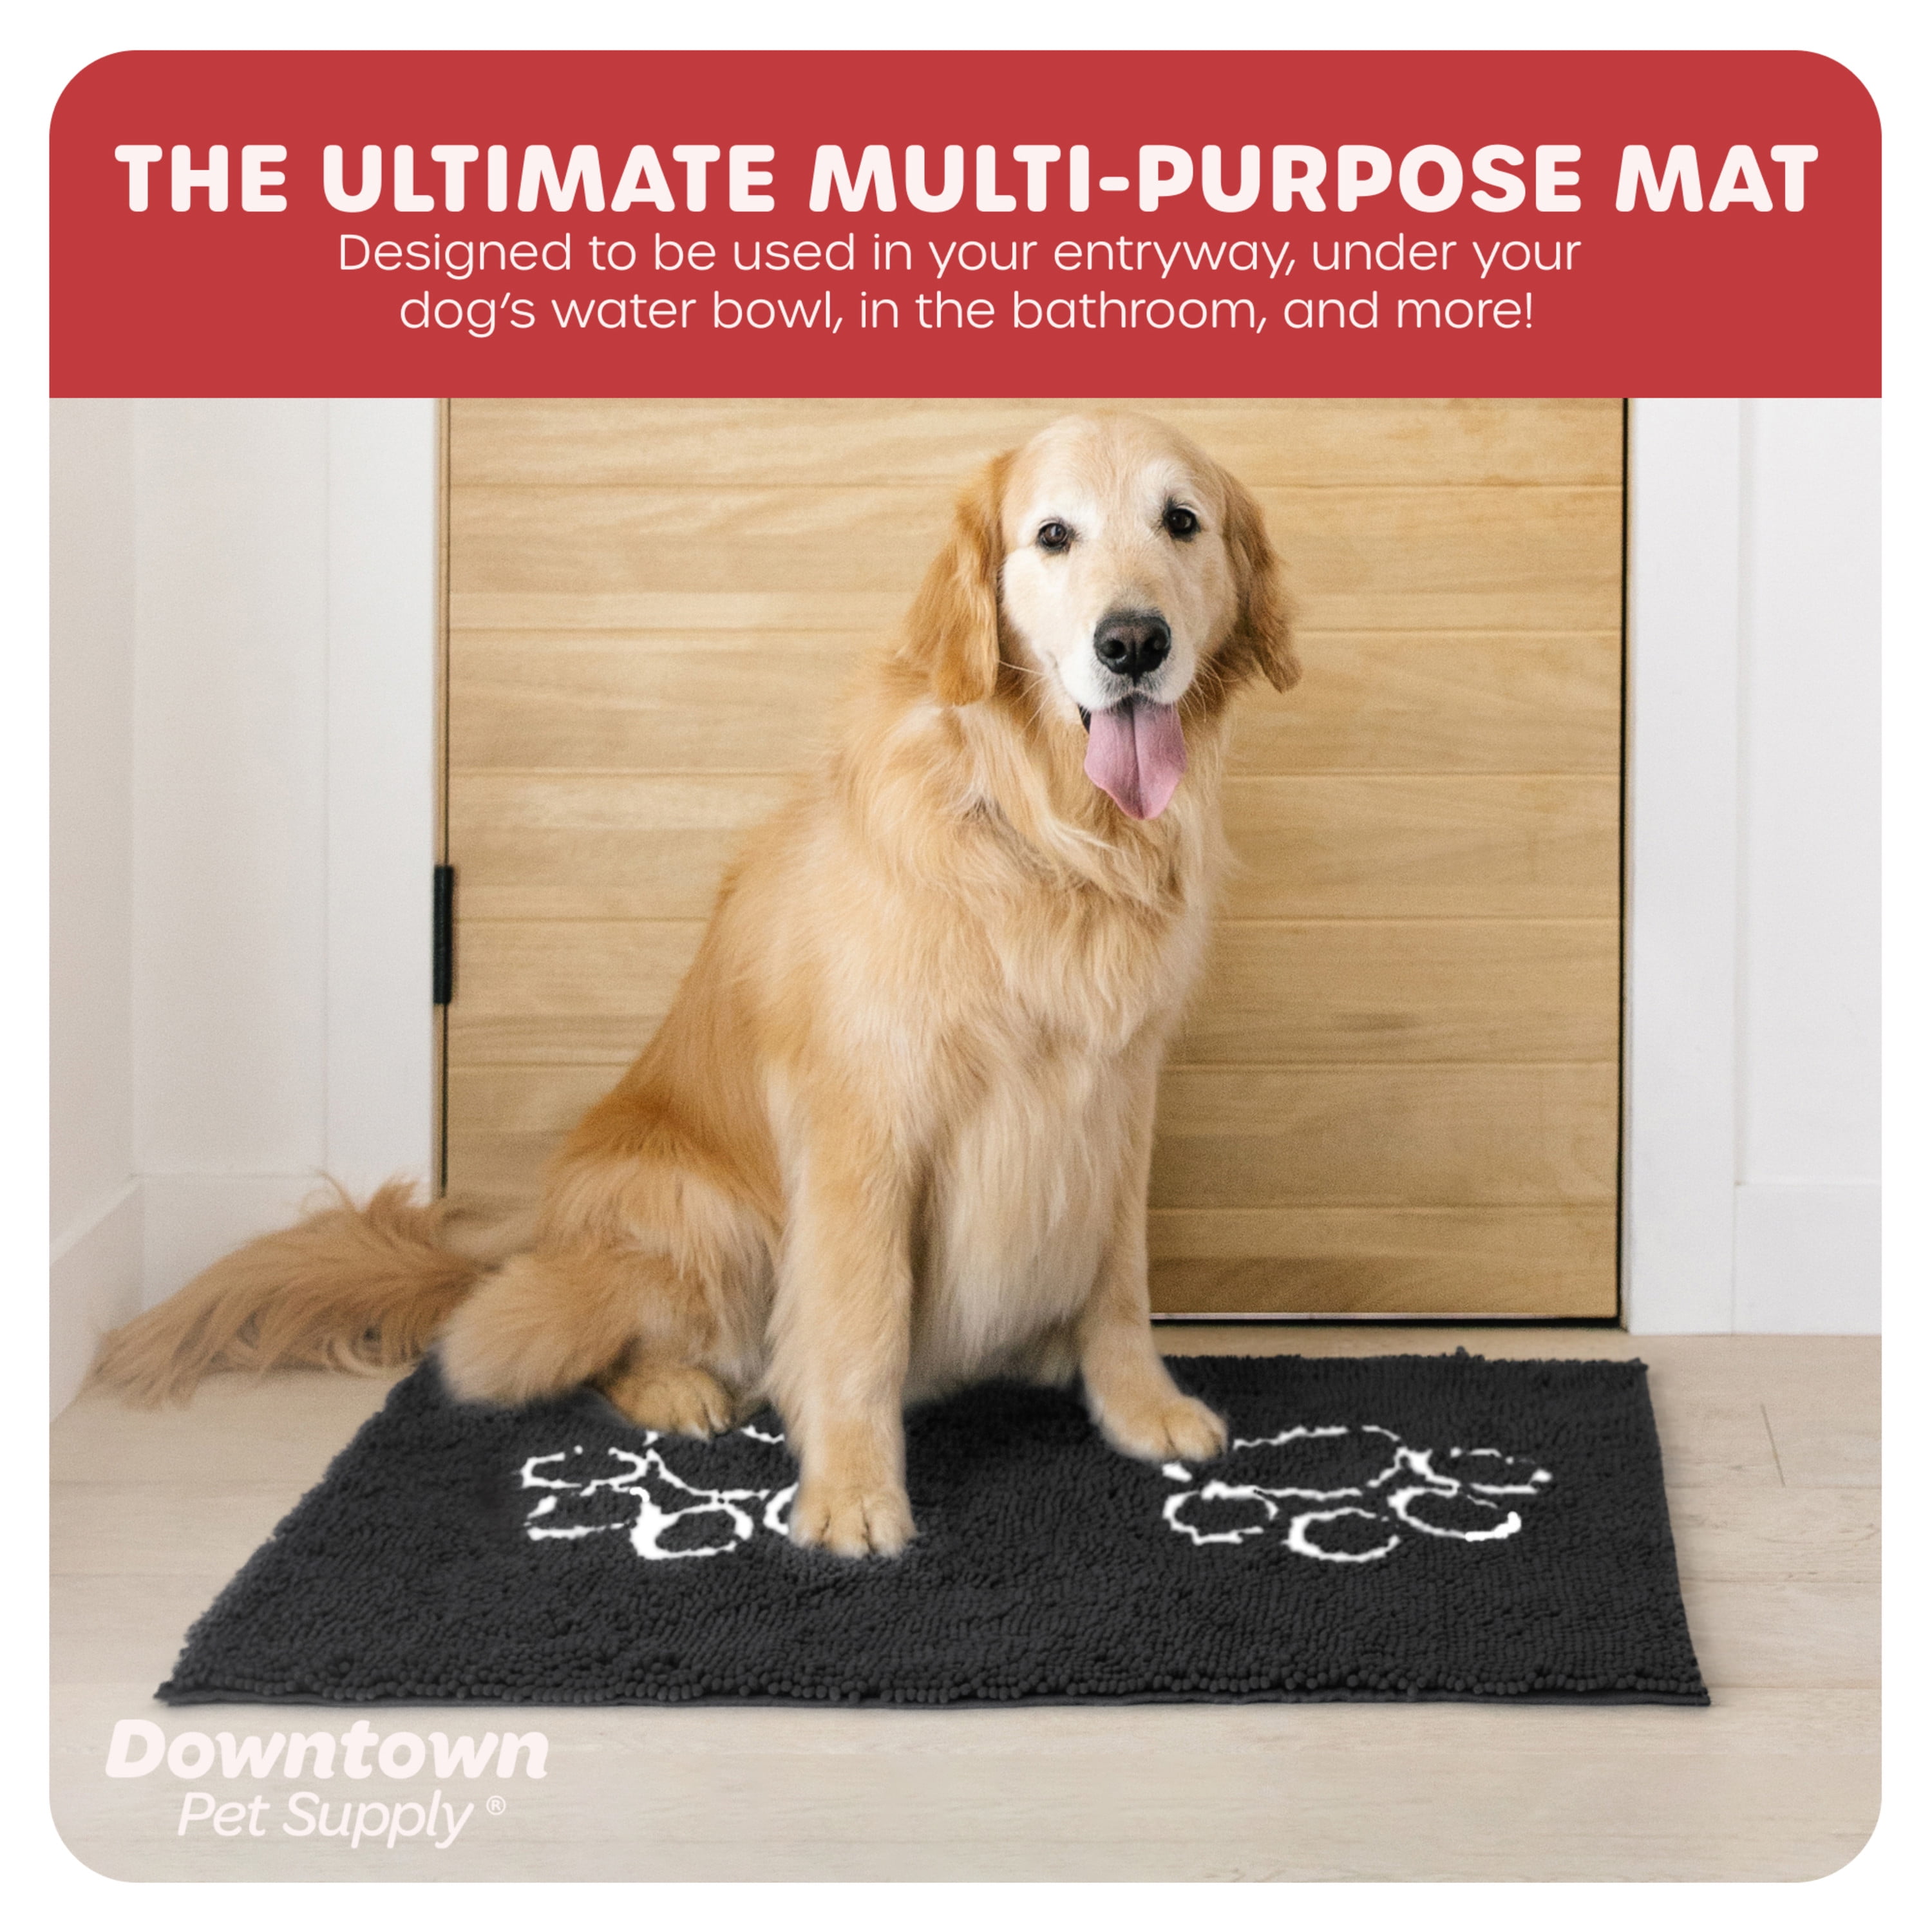 My Doggy Place Ultra Absorbent Microfiber Dog Door Mat Large (36 x 26) Brown w/Paw Print